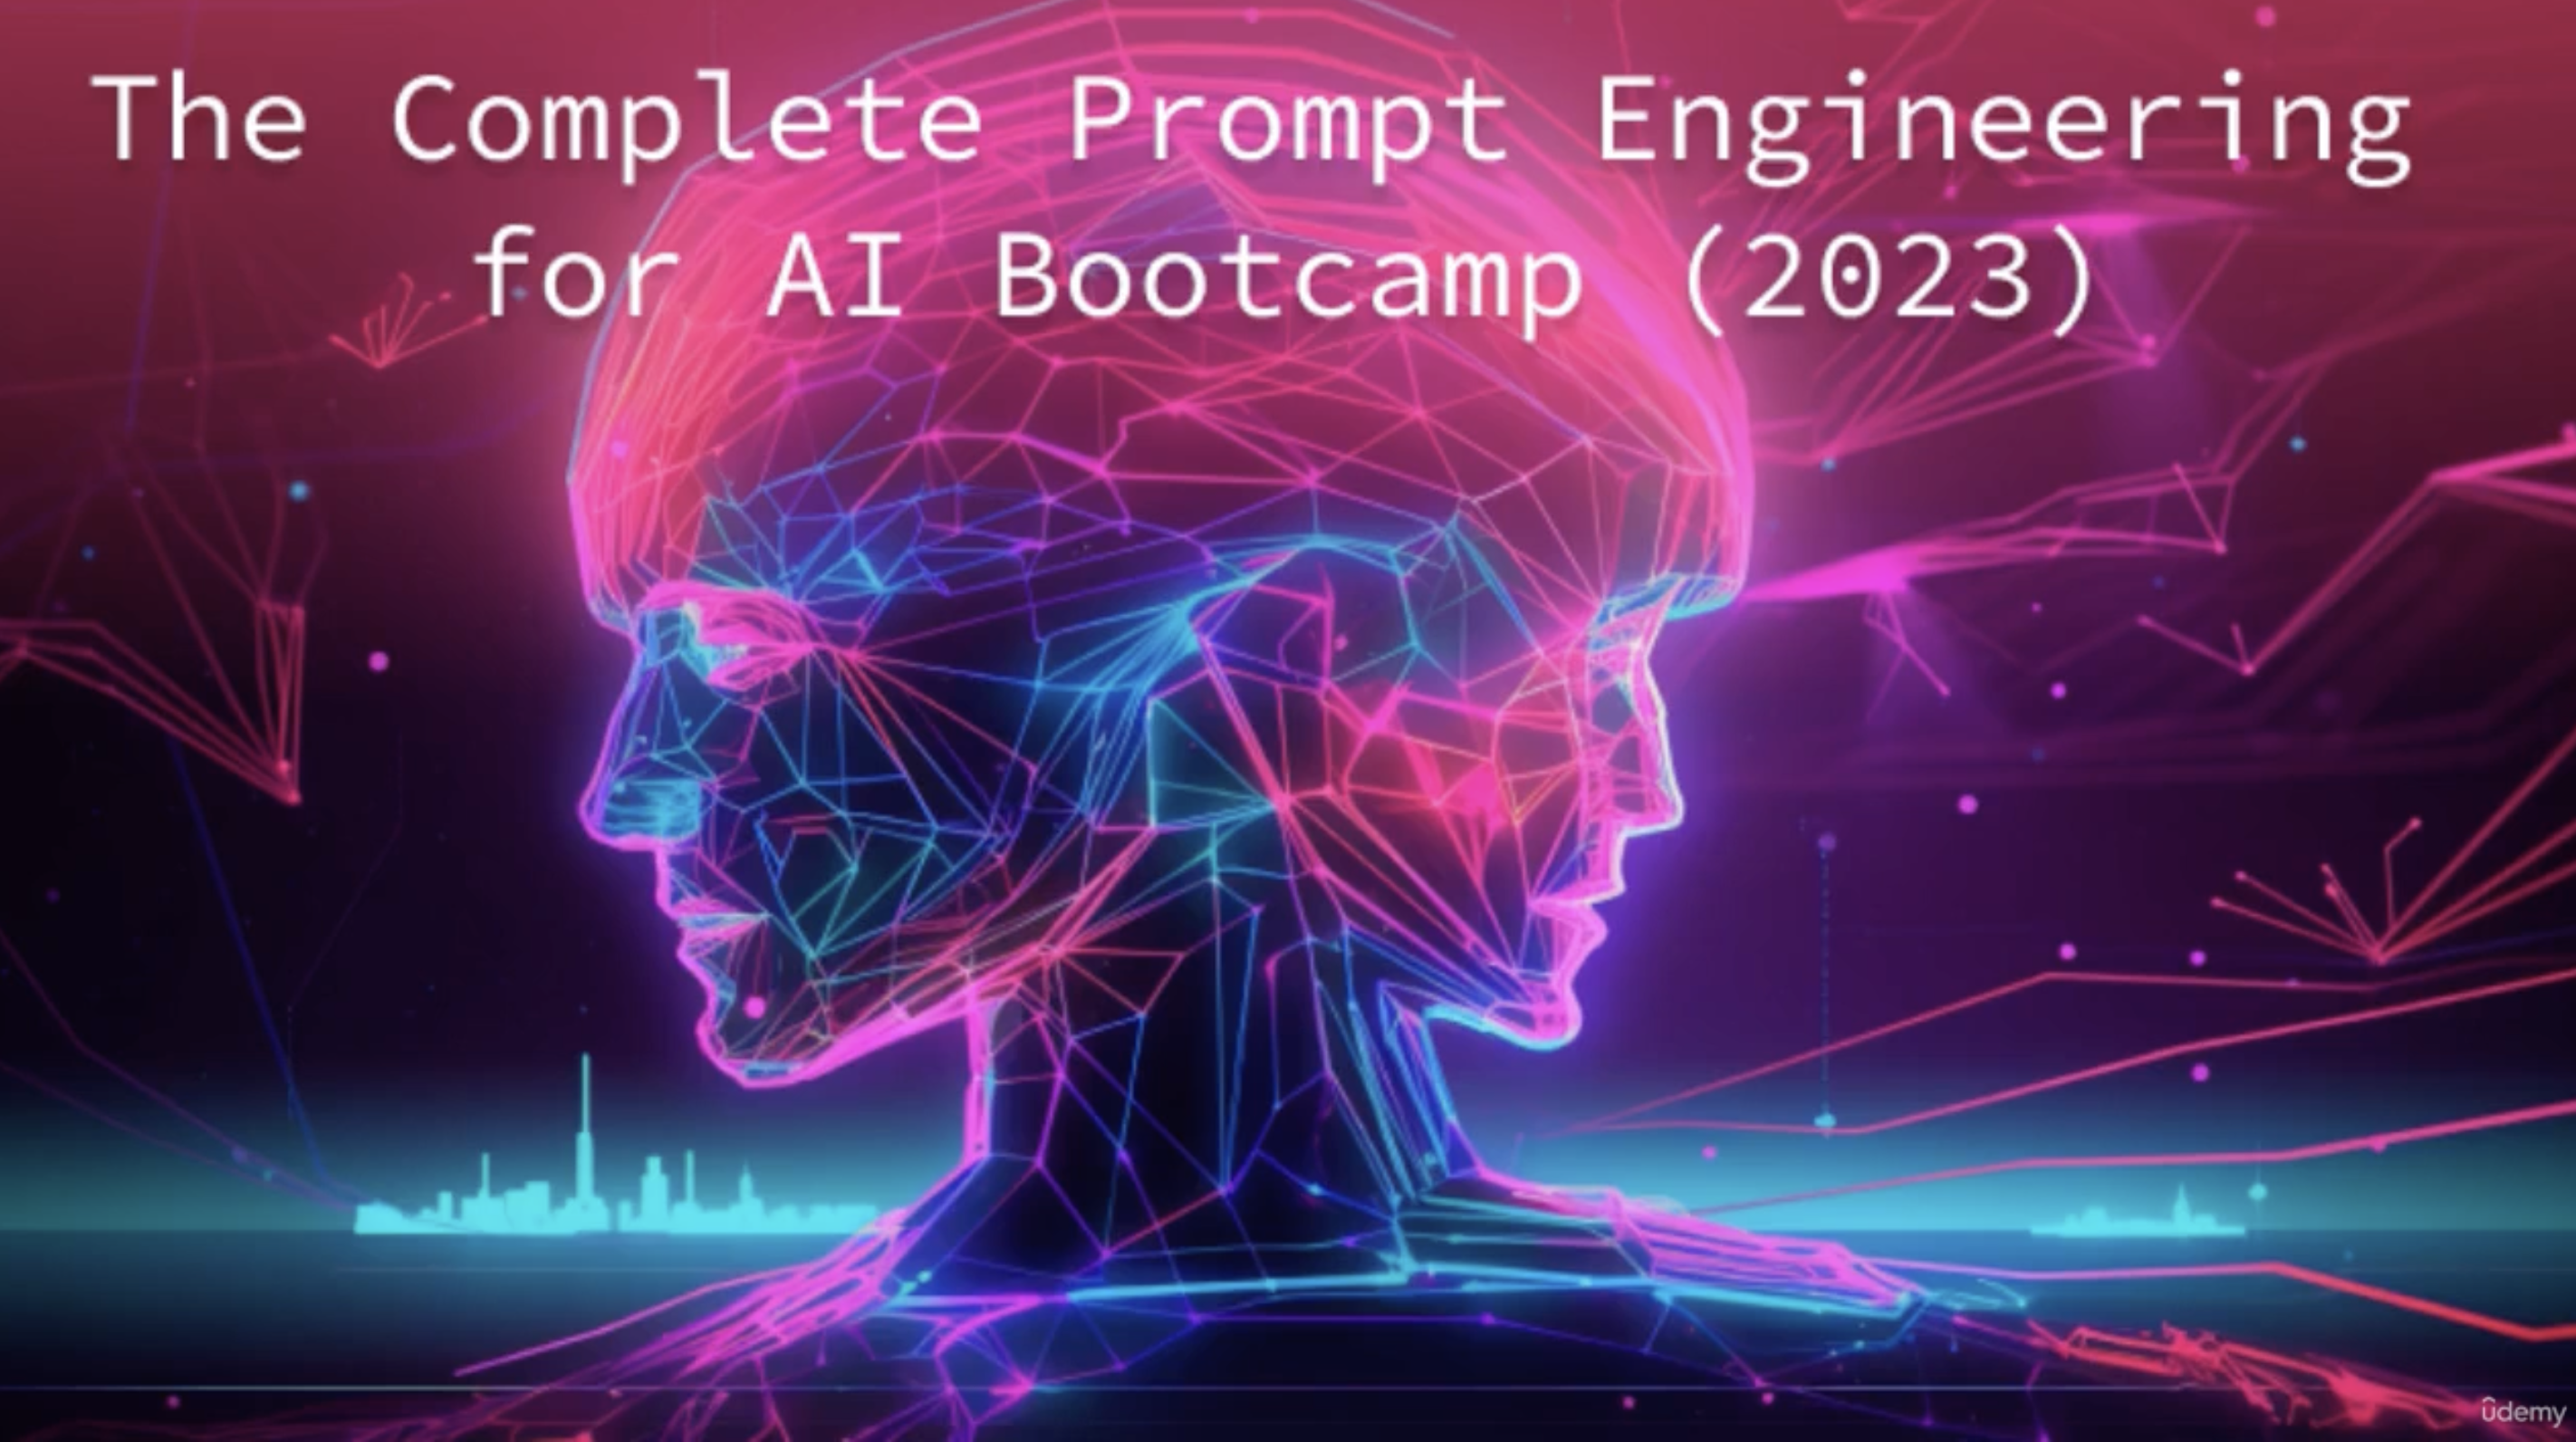 Mike’s course “The Complete Prompt Engineering for AI Bootcamp (2023) 